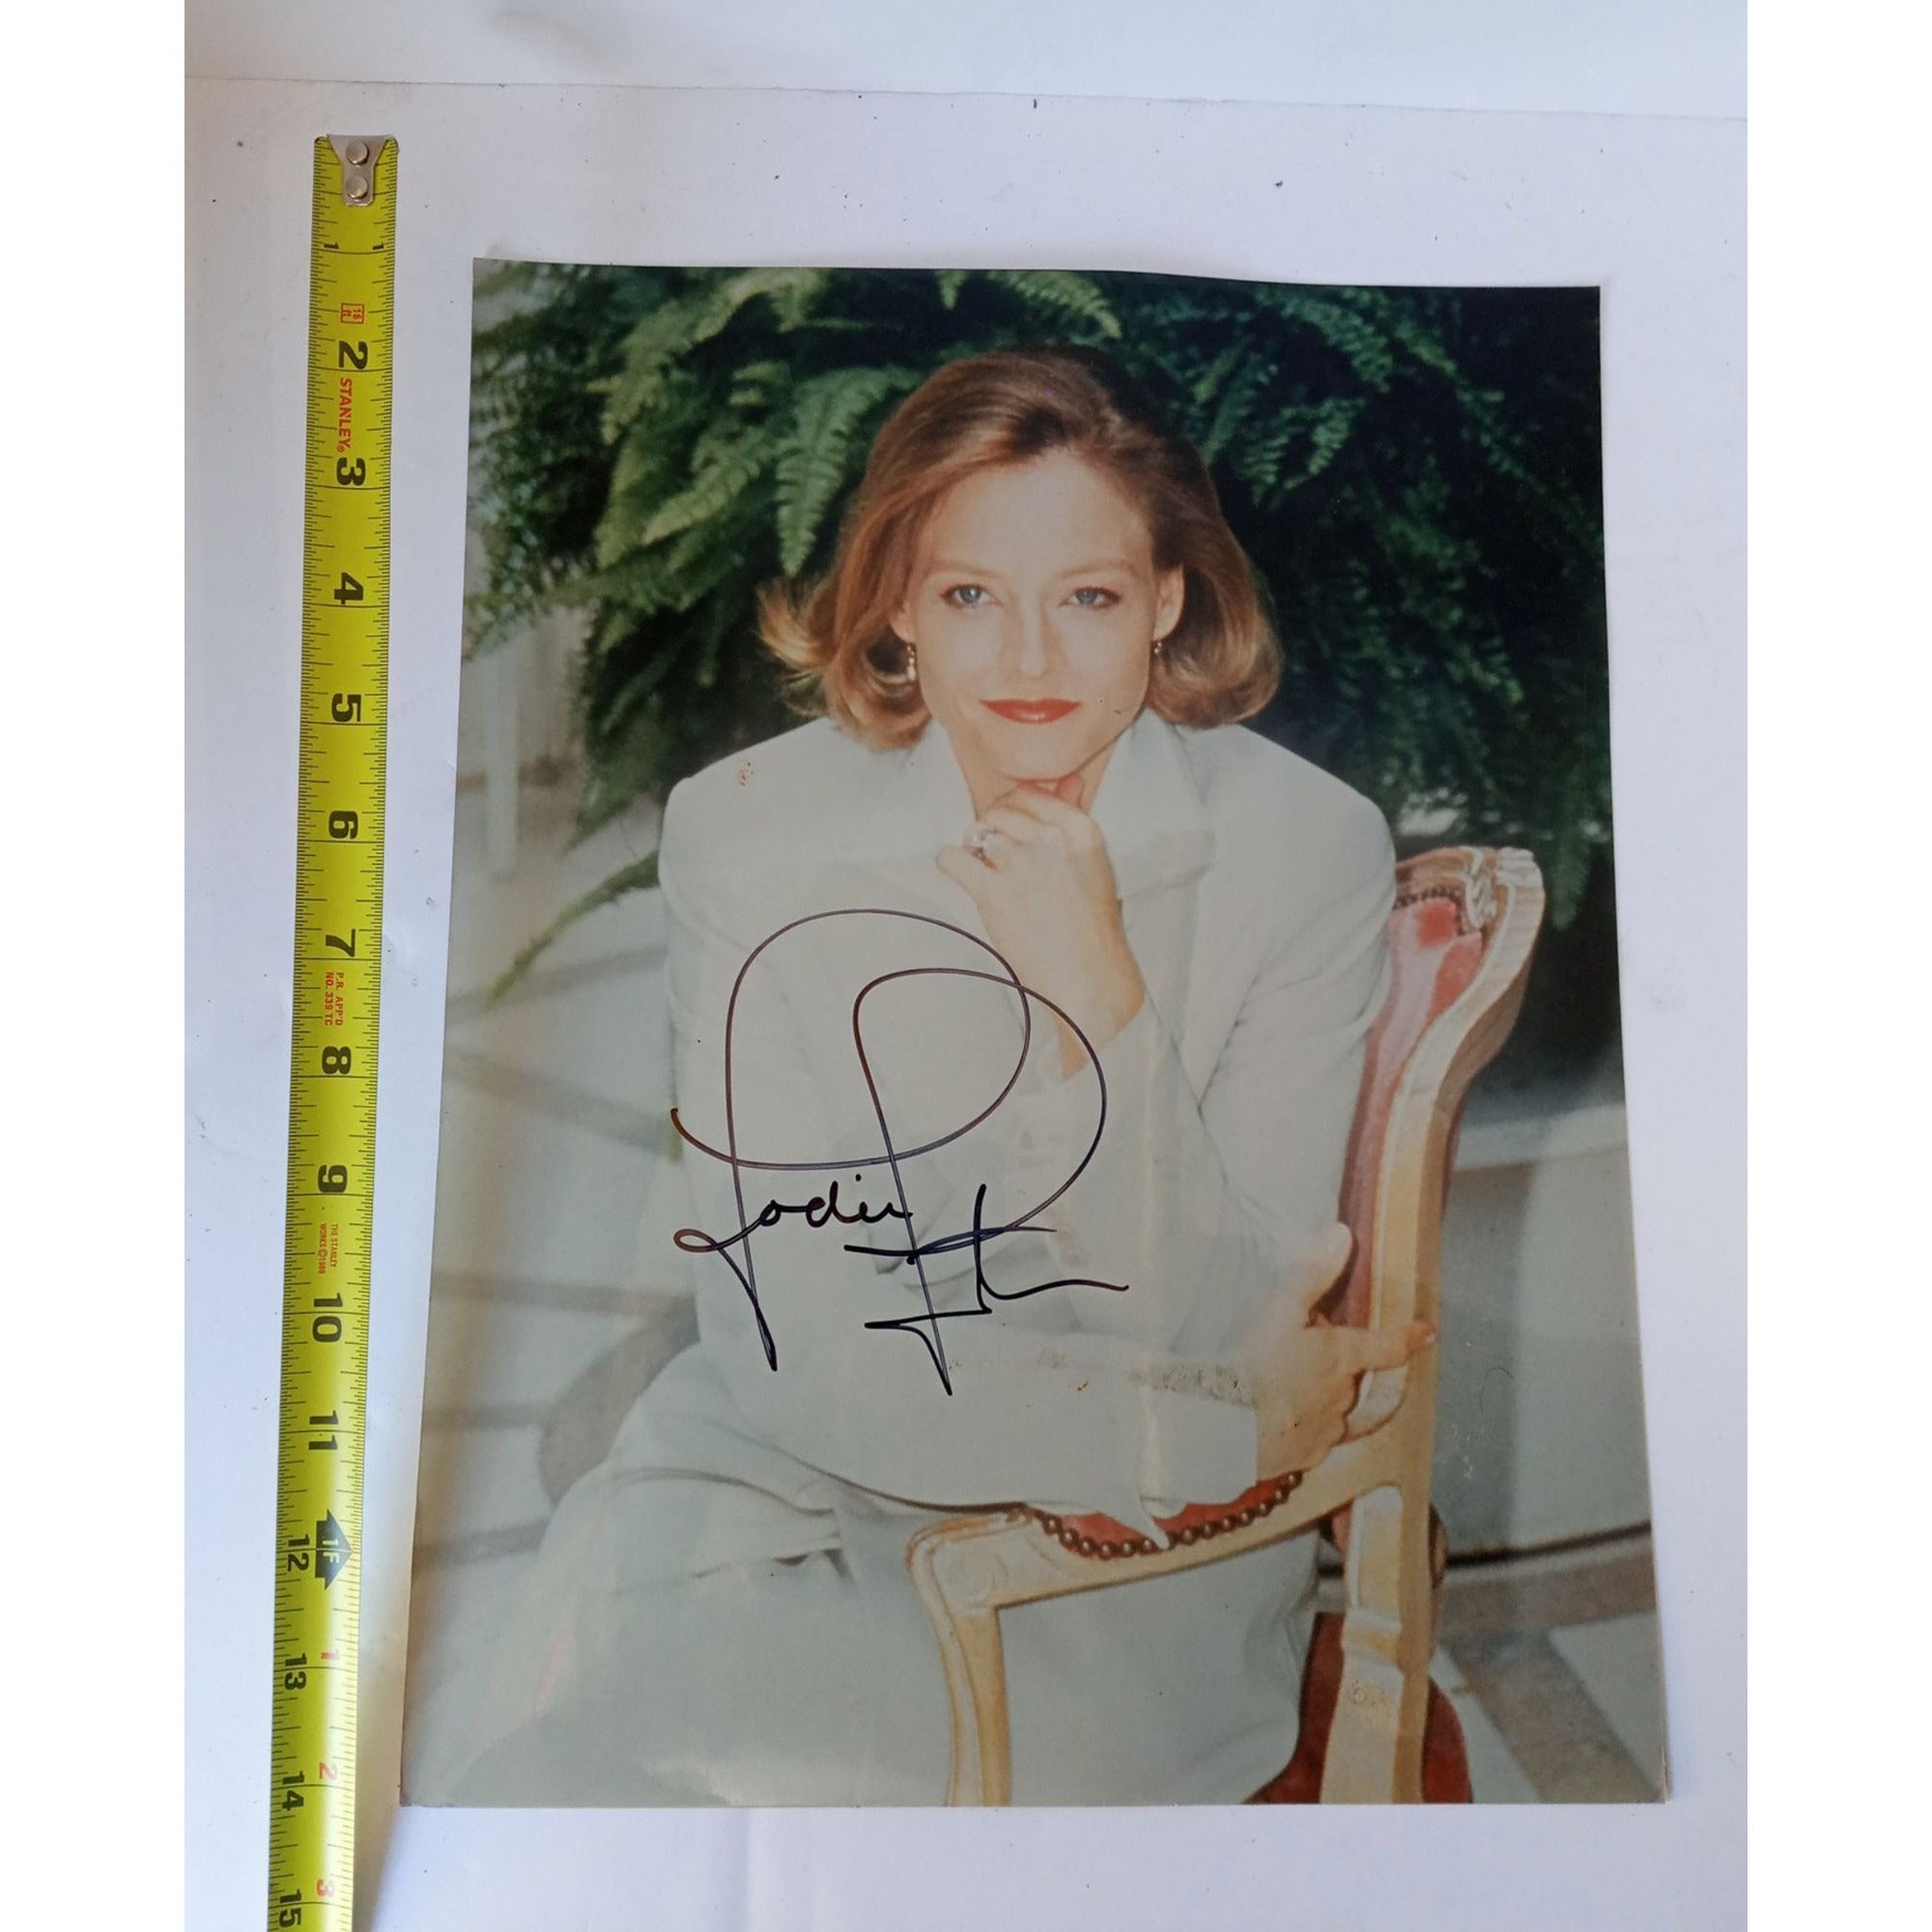 Jodie Foster 11 x 14 signed photo with proof